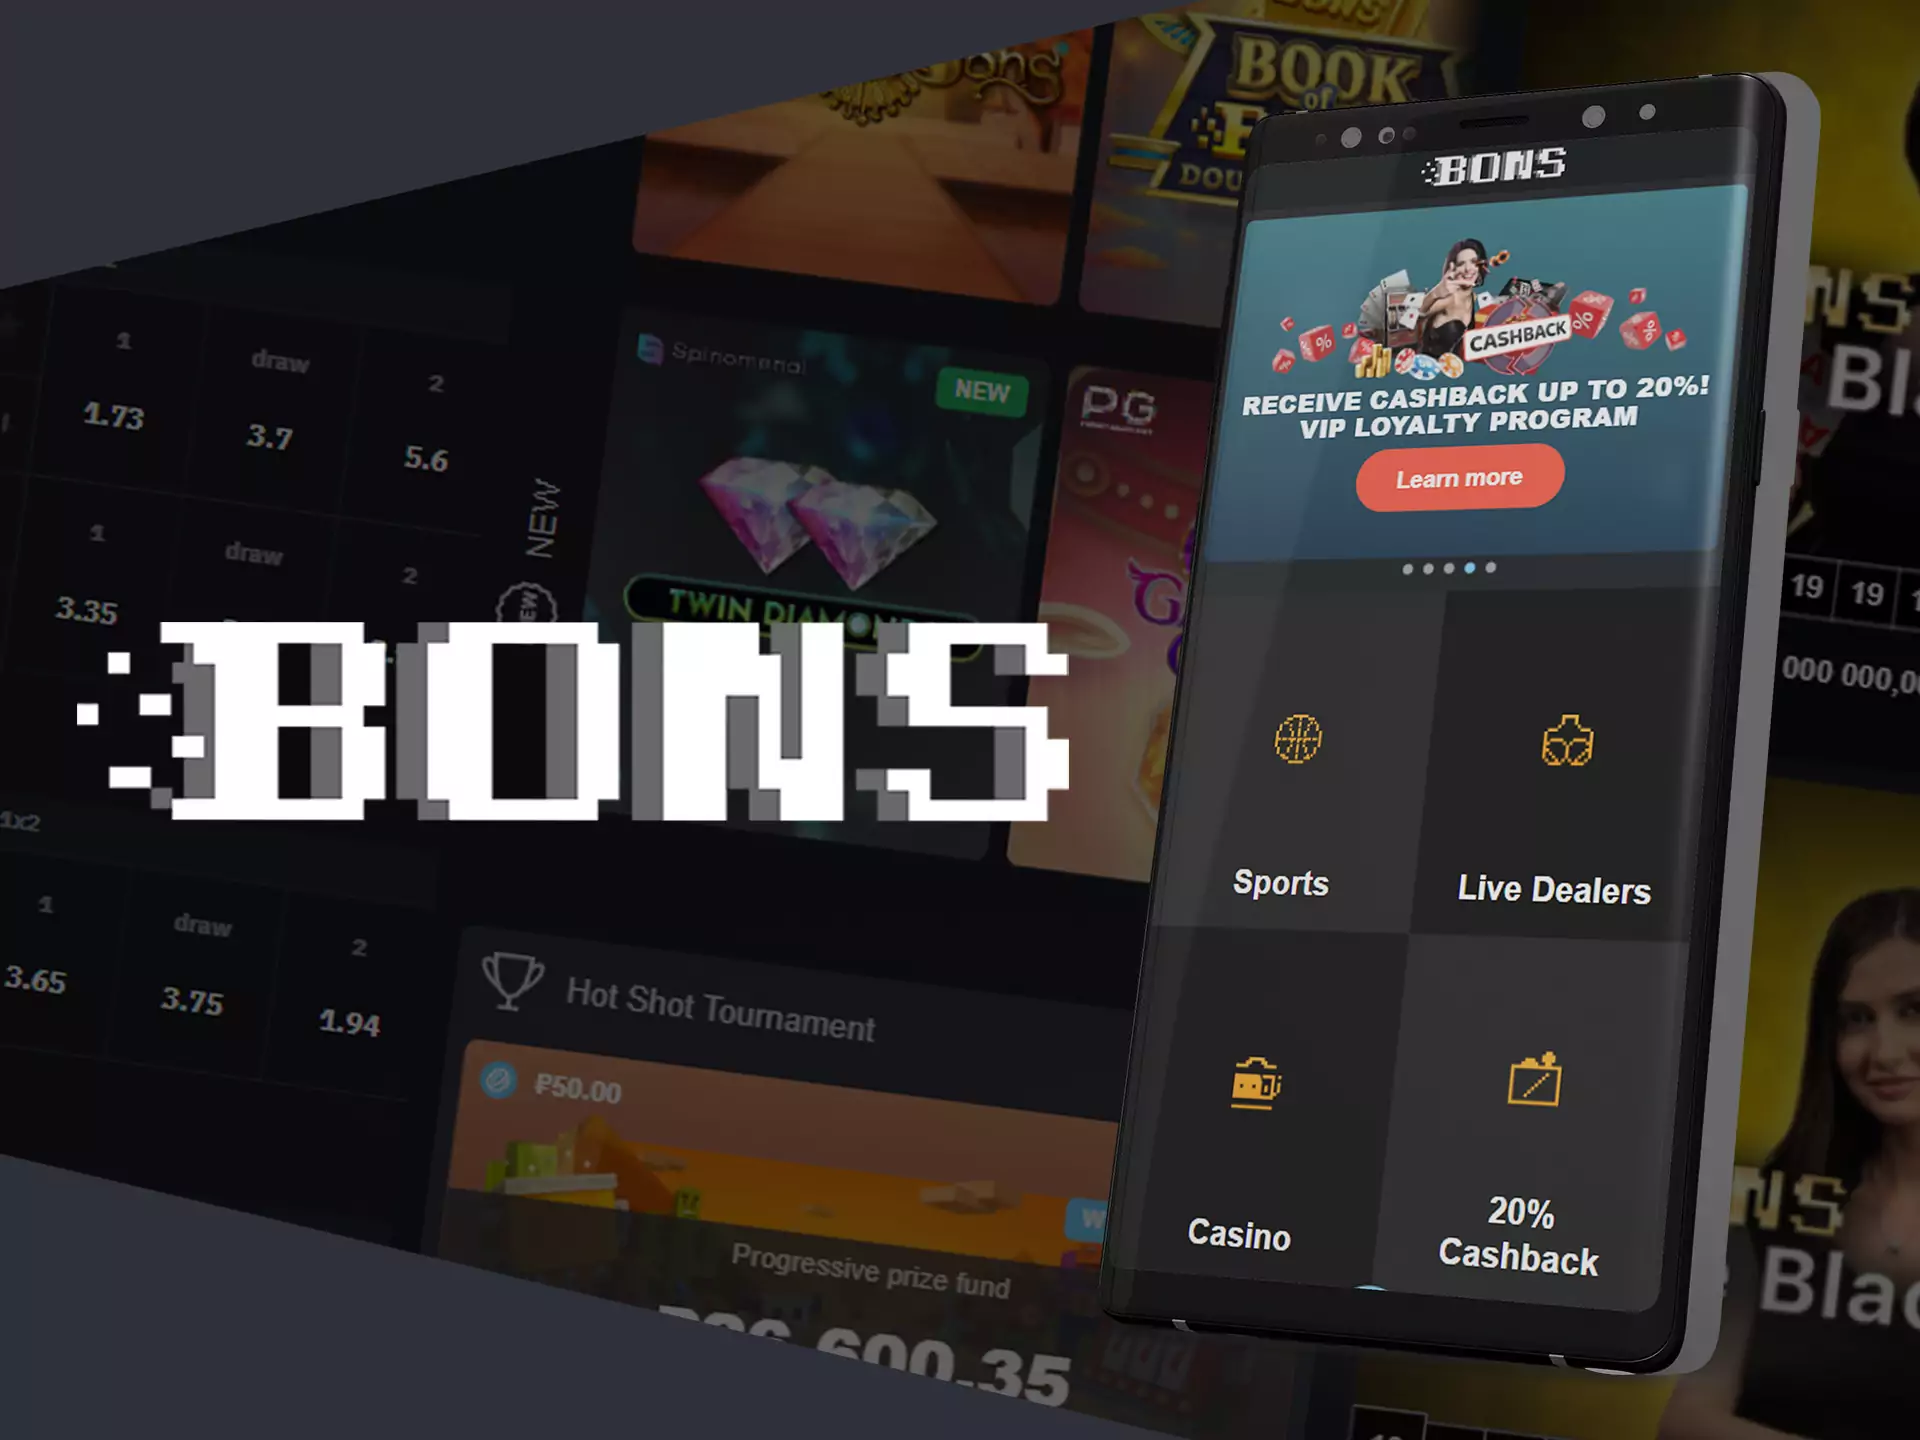 The Bons app is easy to download and start betting.